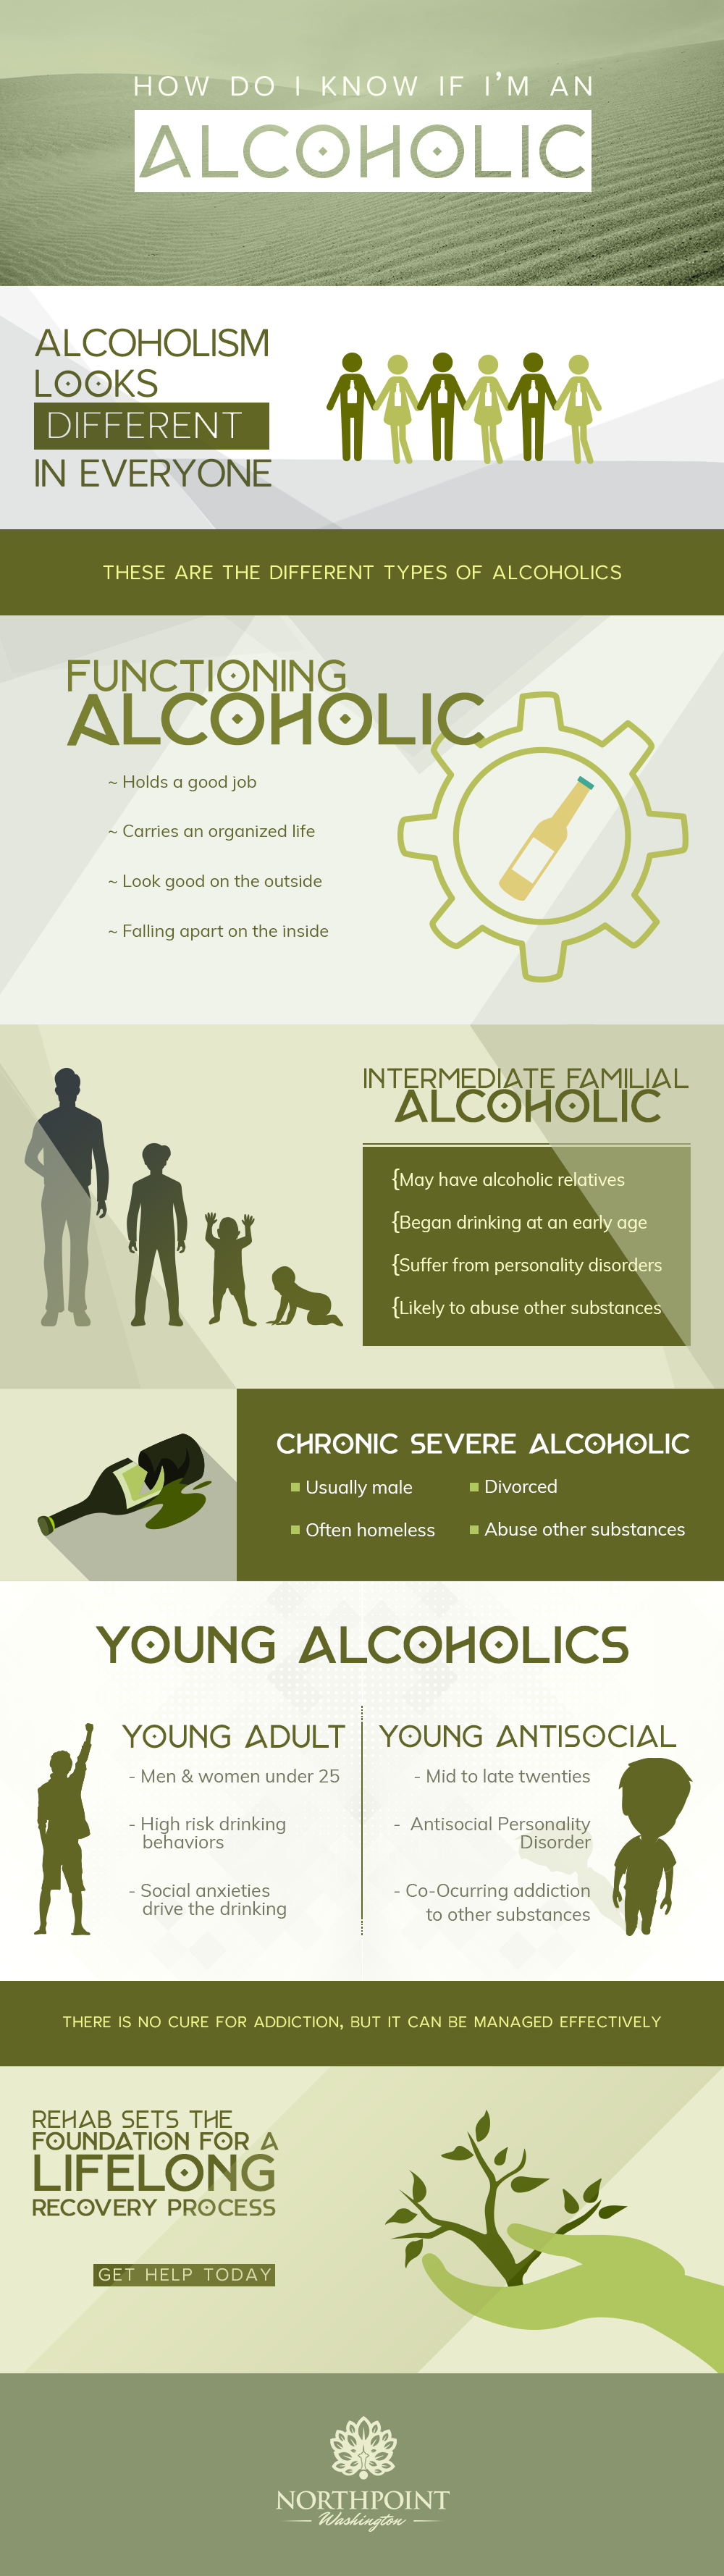 How do I Know if I am an Alcoholic Infographic